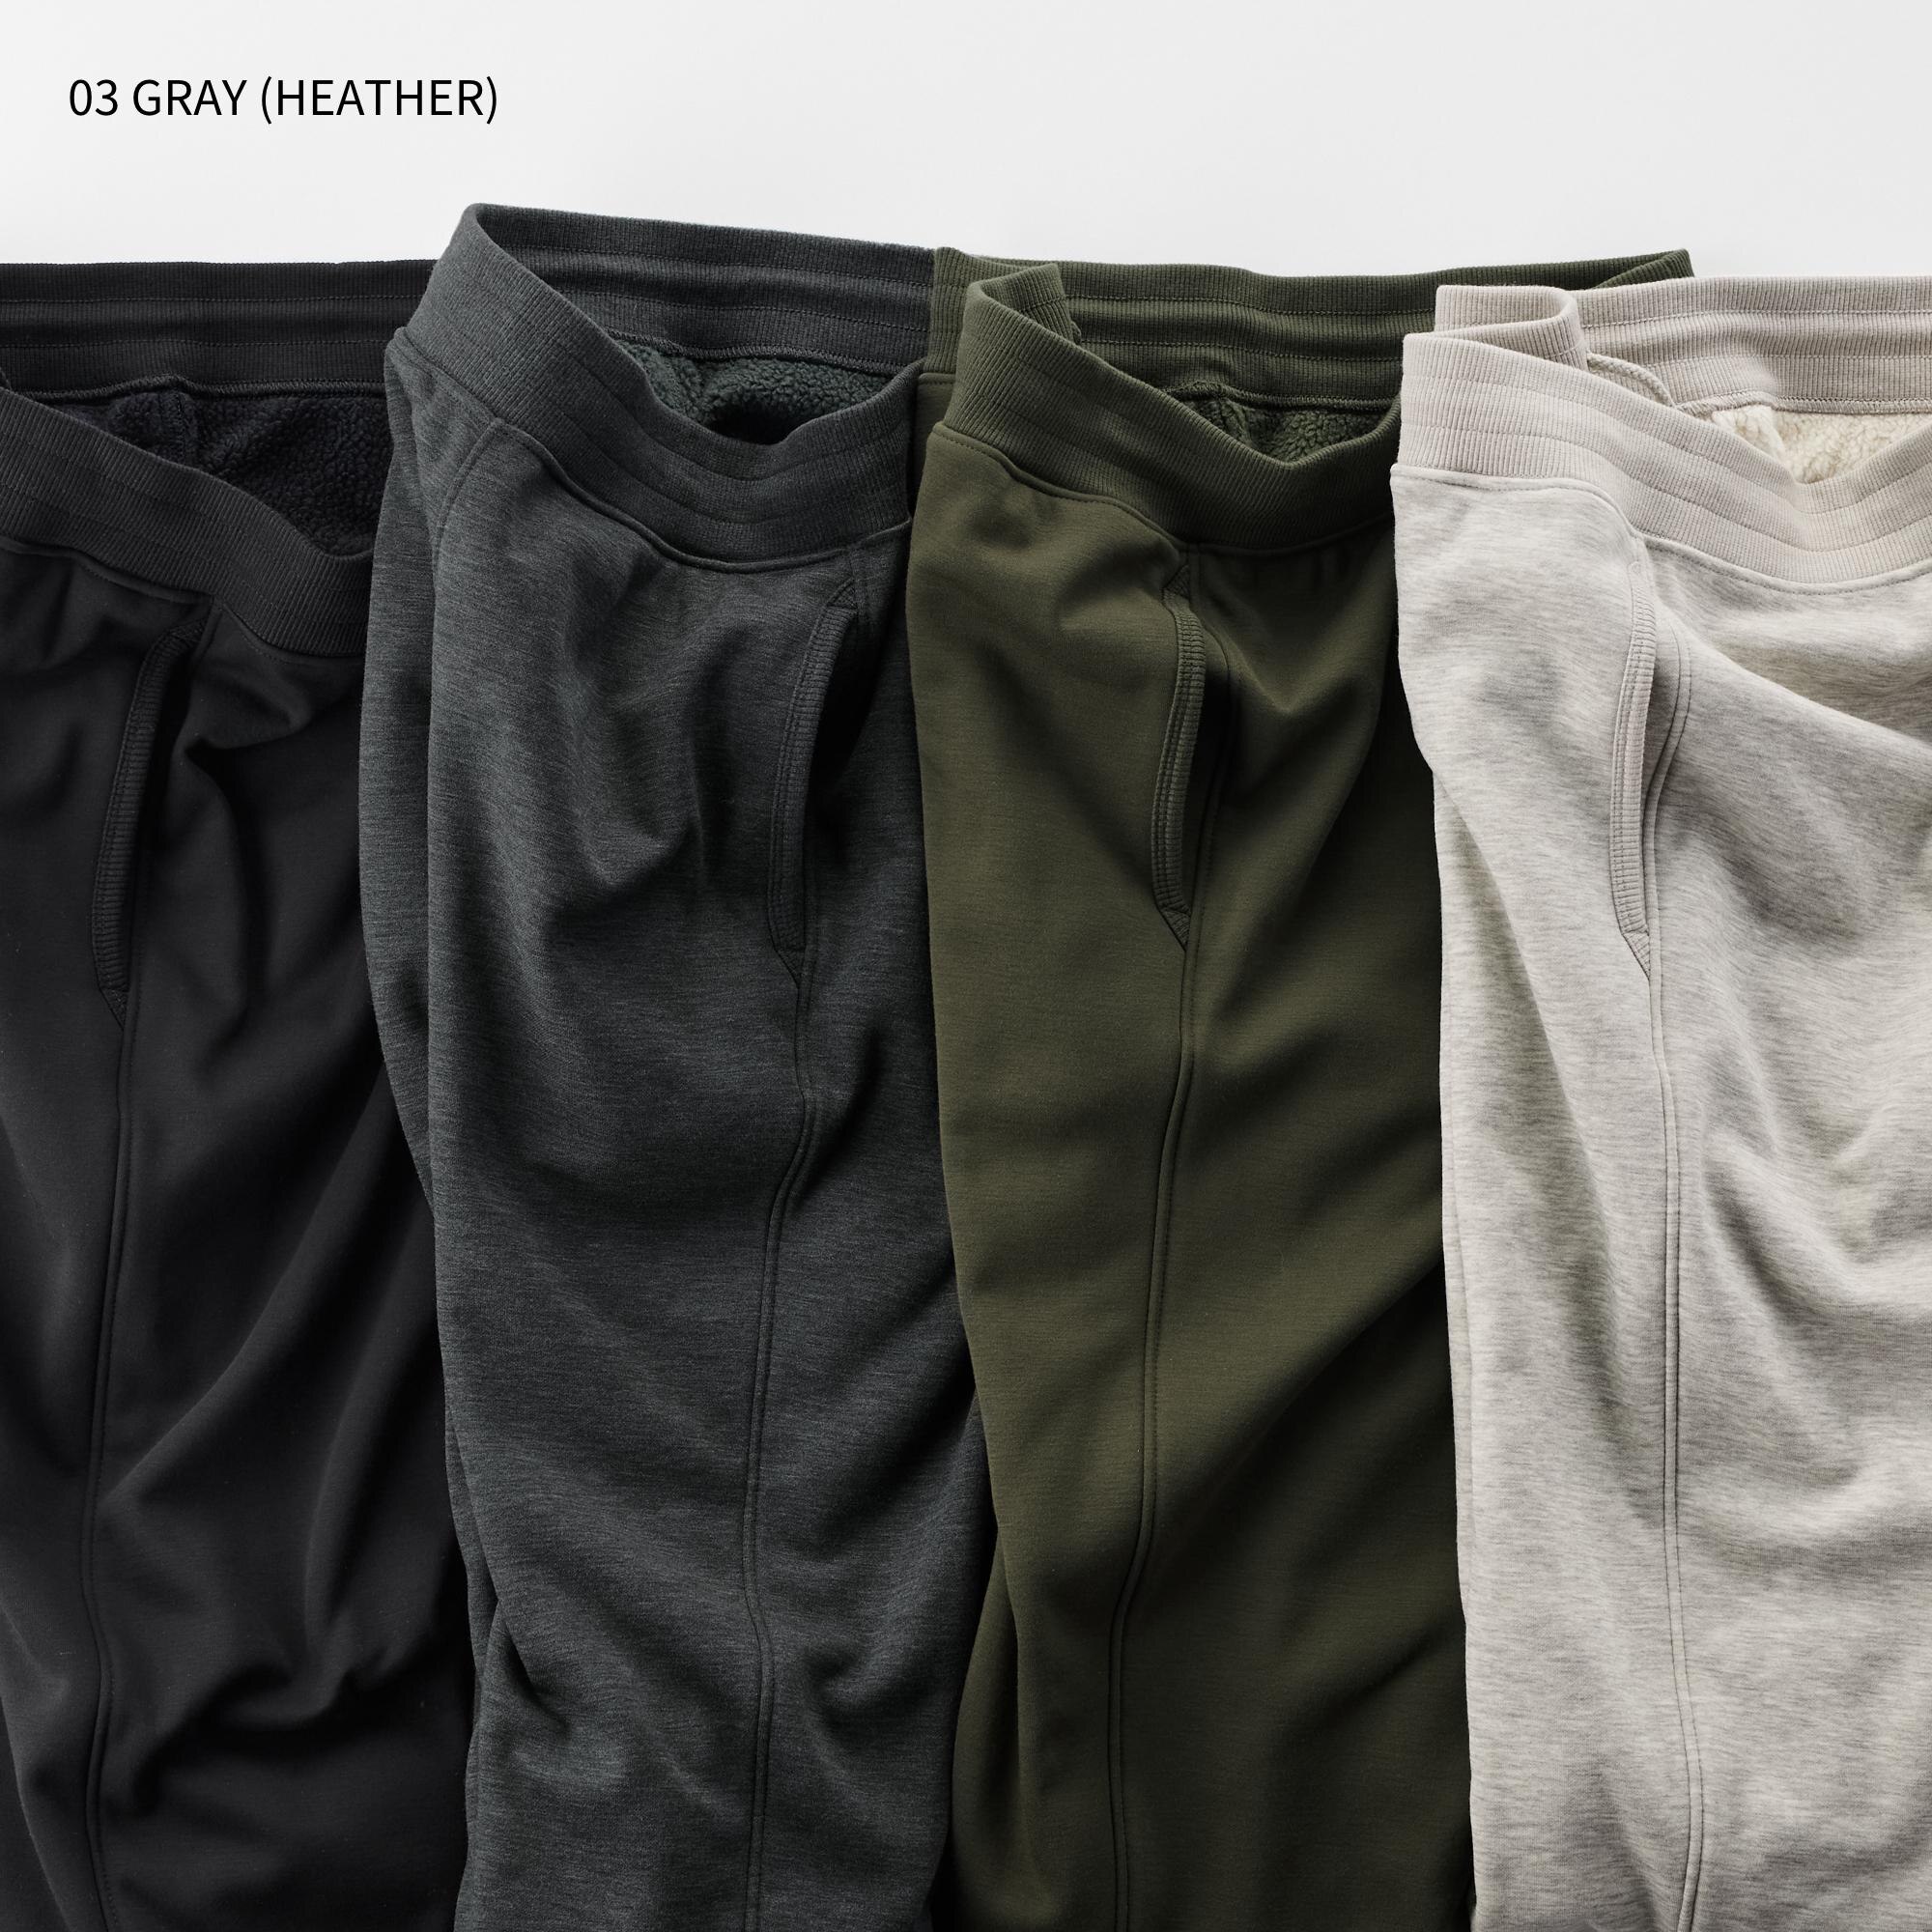 HEATTECH Pleated Tapered Pants | UNIQLO US | Pleated trousers, Tapered pants,  Uniqlo